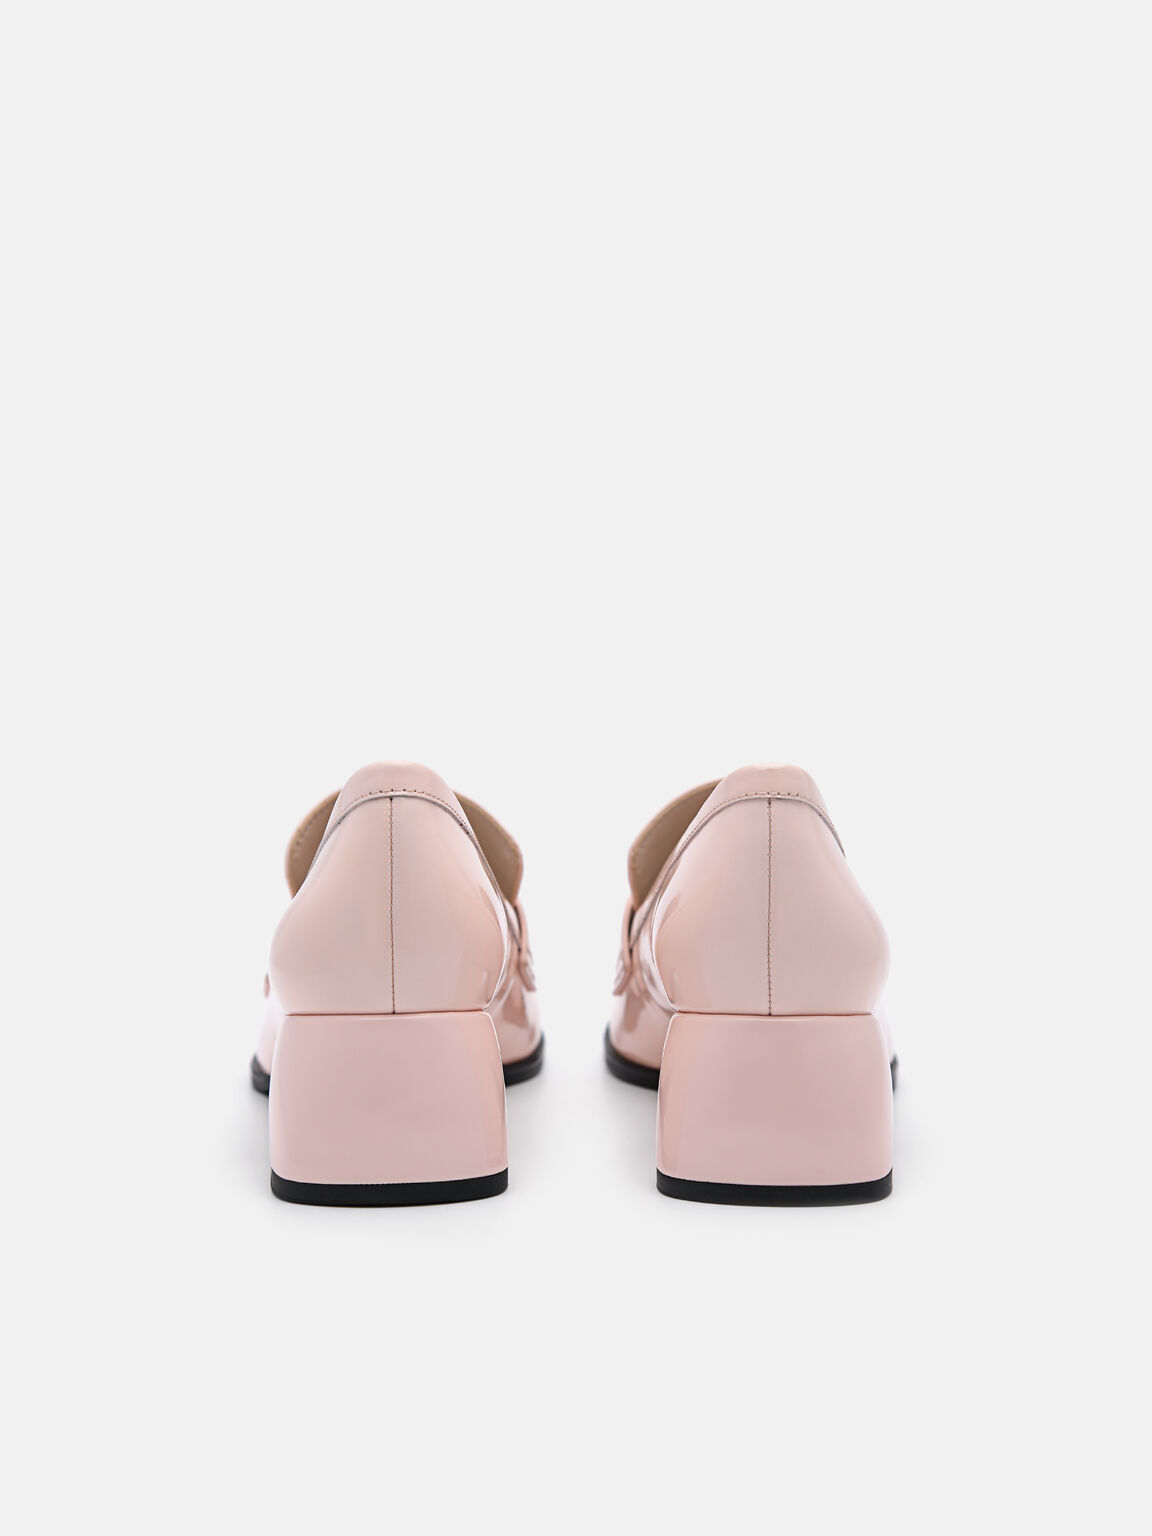 Maggie Leather Heel Loafers, Blush